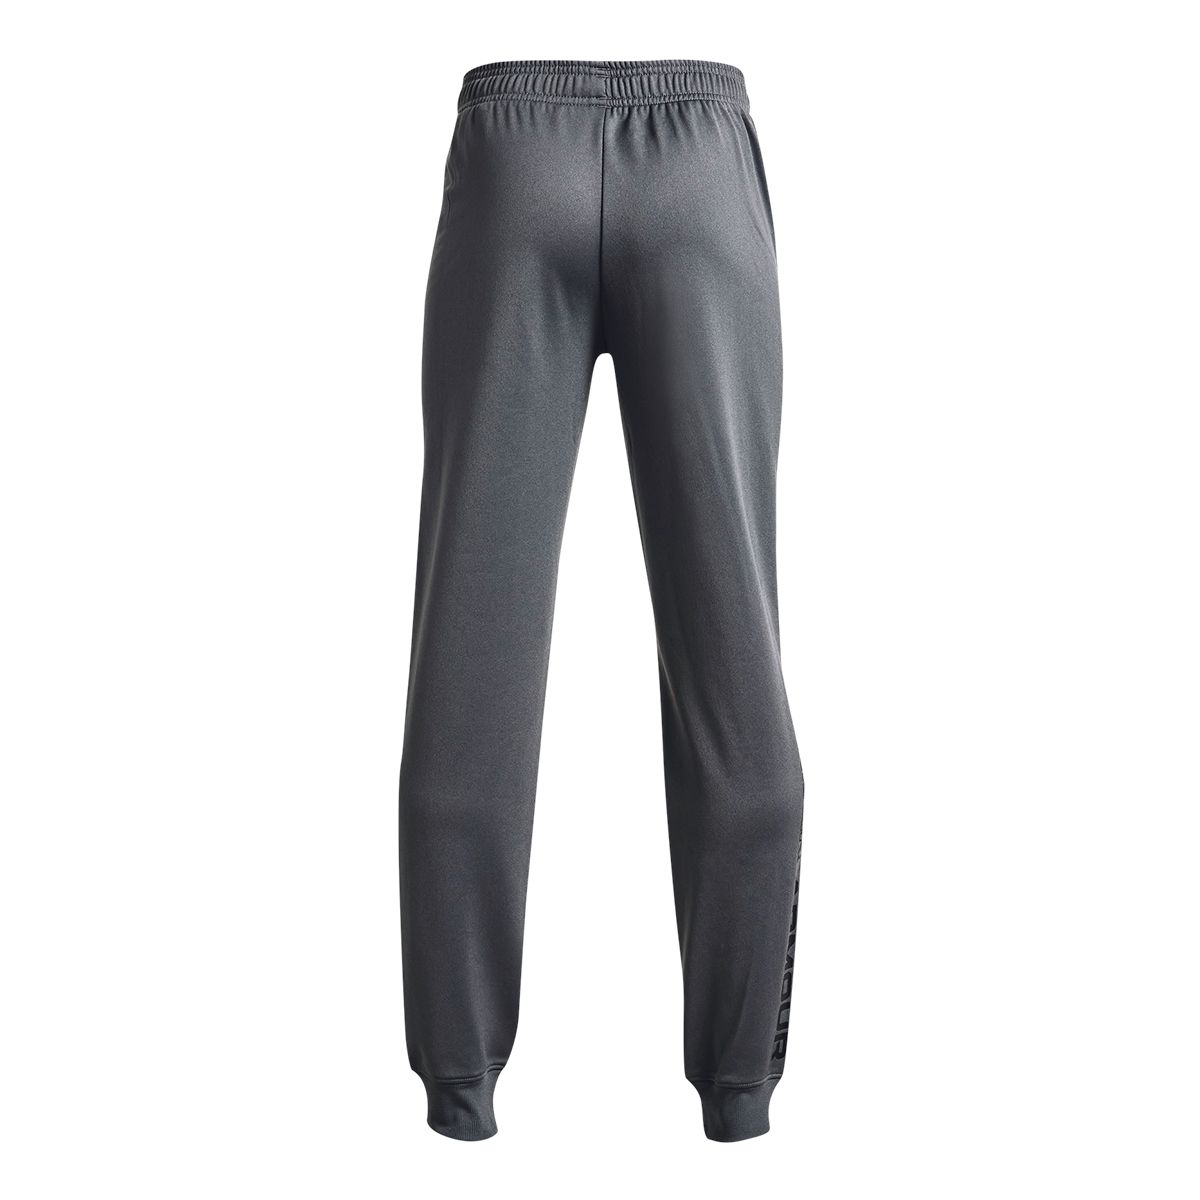 https://media-www.atmosphere.ca/product/div-03-softgoods/dpt-72-casual-clothing/sdpt-03-boys/333455425/ua-b-brawler-2-0-tapered-pant-pitch-grey-black-l--5503b680-41bc-4339-9c23-ba4bf35d5430-jpgrendition.jpg?imdensity=1&imwidth=1244&impolicy=mZoom